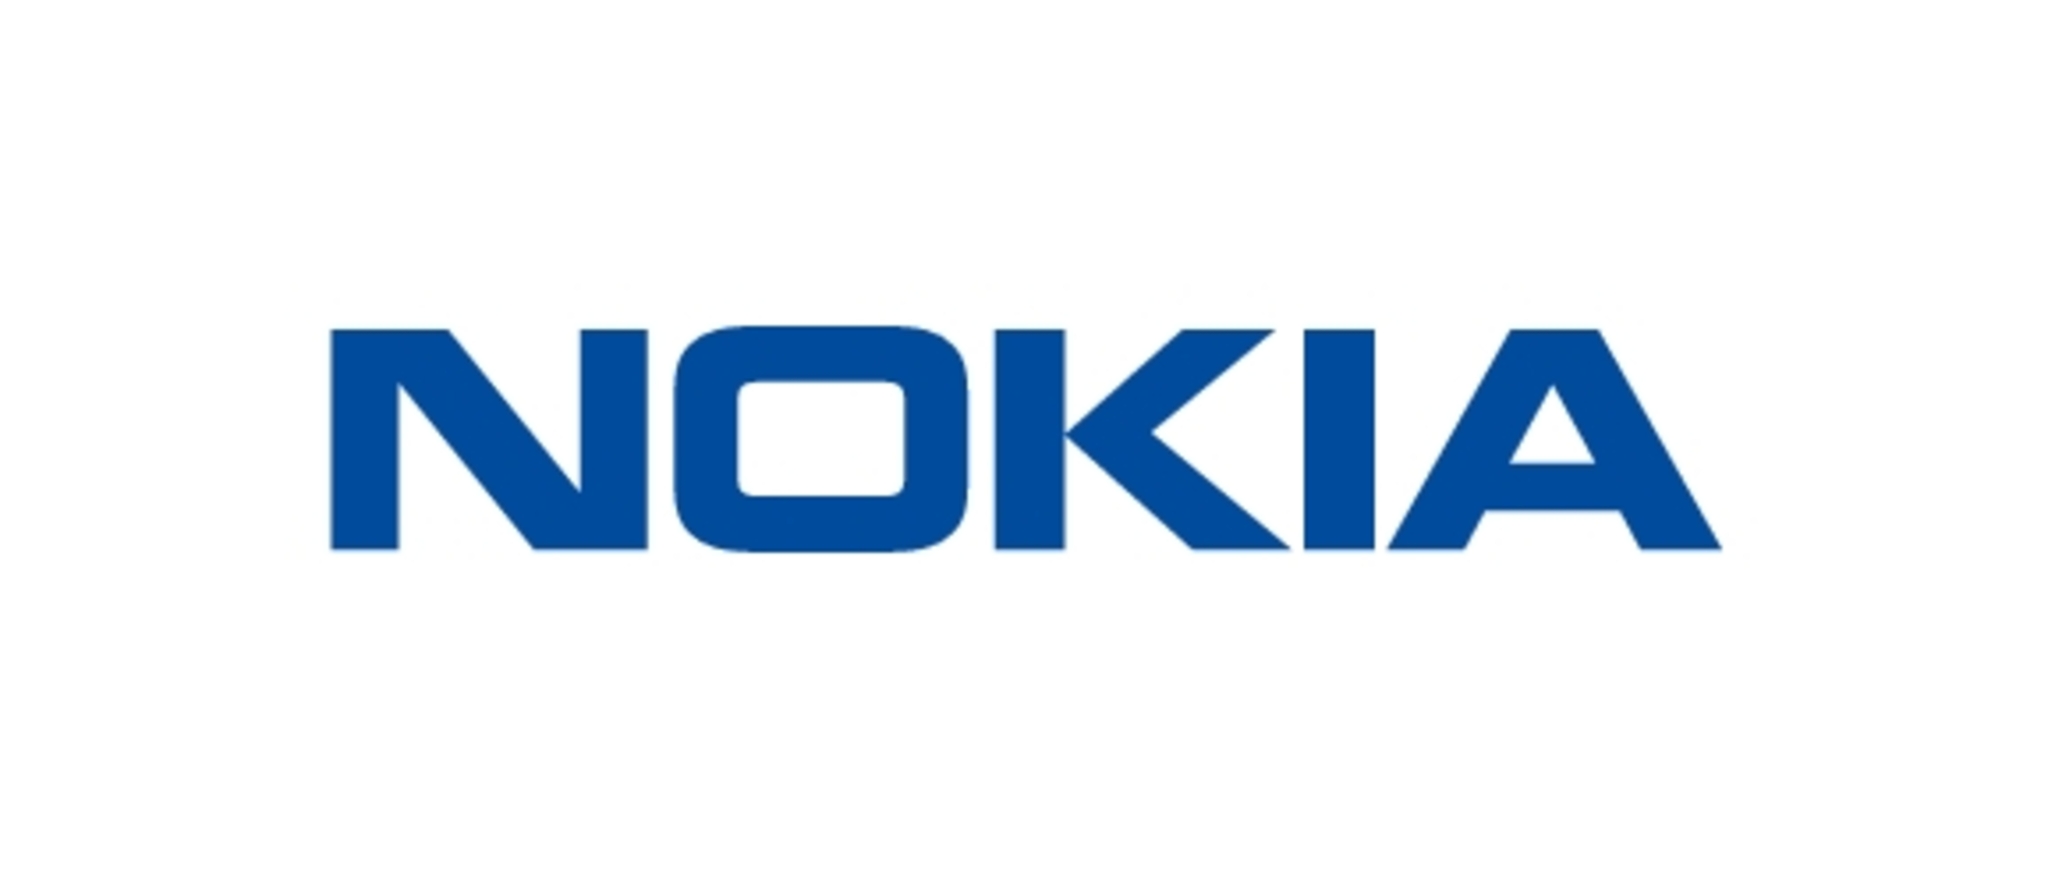 Nokia Logo - for some reason we don't have an alt tag here